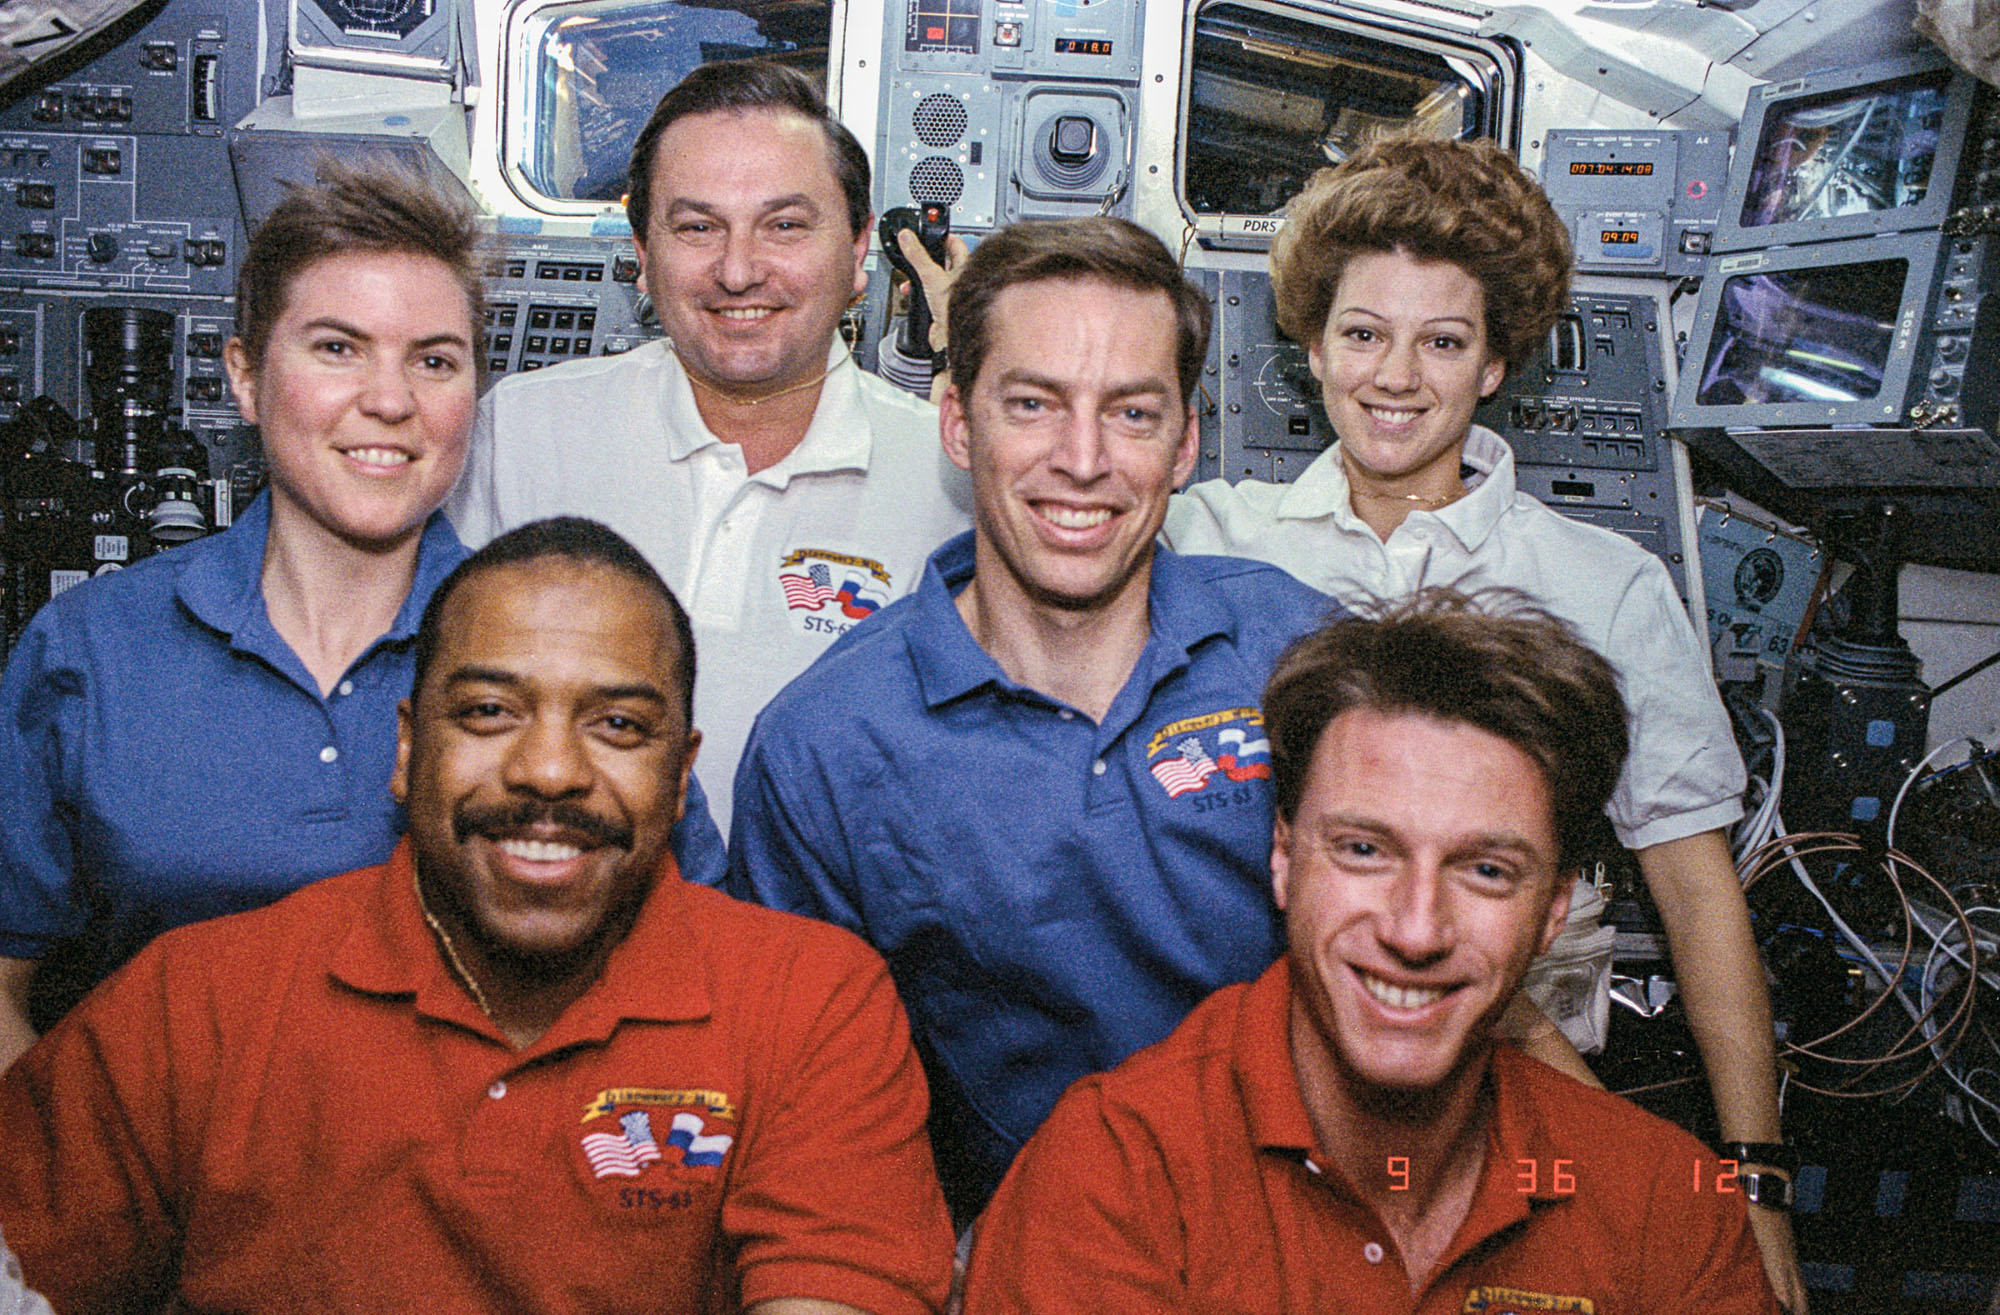 The crew looks smiling at the camera from inside the Space Shuttle